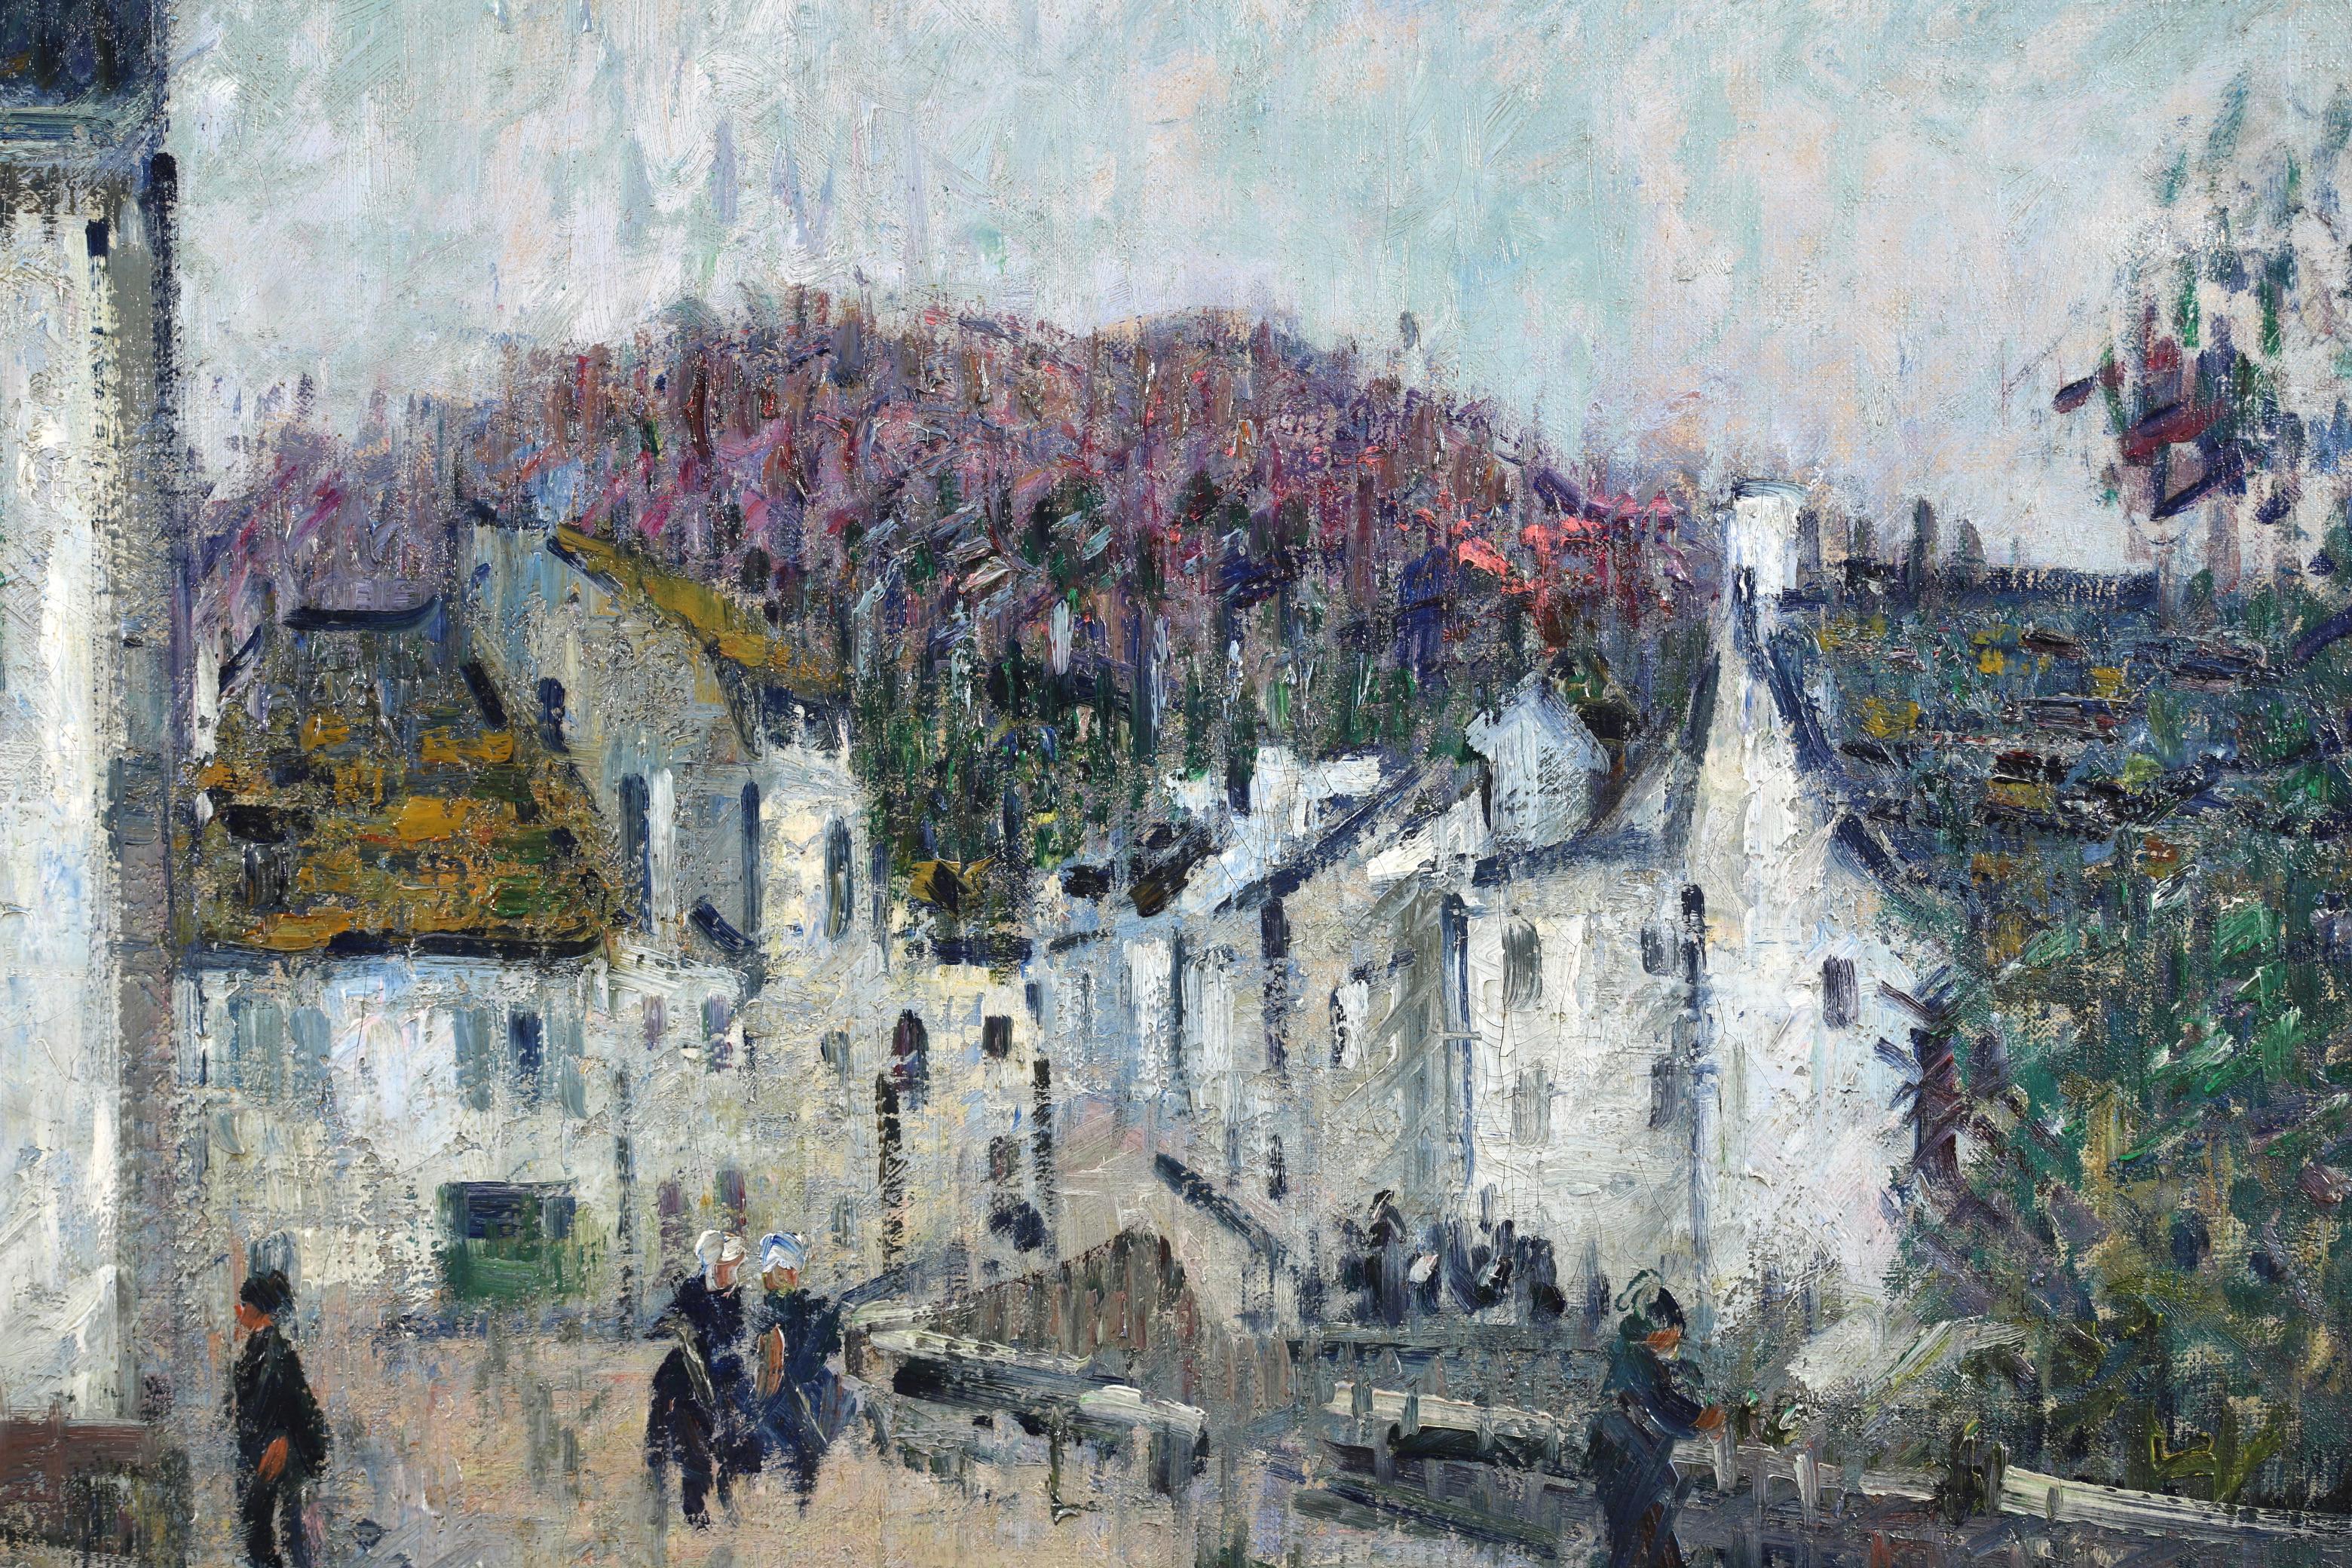 A very beautiful large signed oil on canvas by Gustave Loiseau depicting figures in the street at Pont Aven in brittany. The work is signed lower left and unlined on its original canvas. This work will be included in the forthcoming catalogue